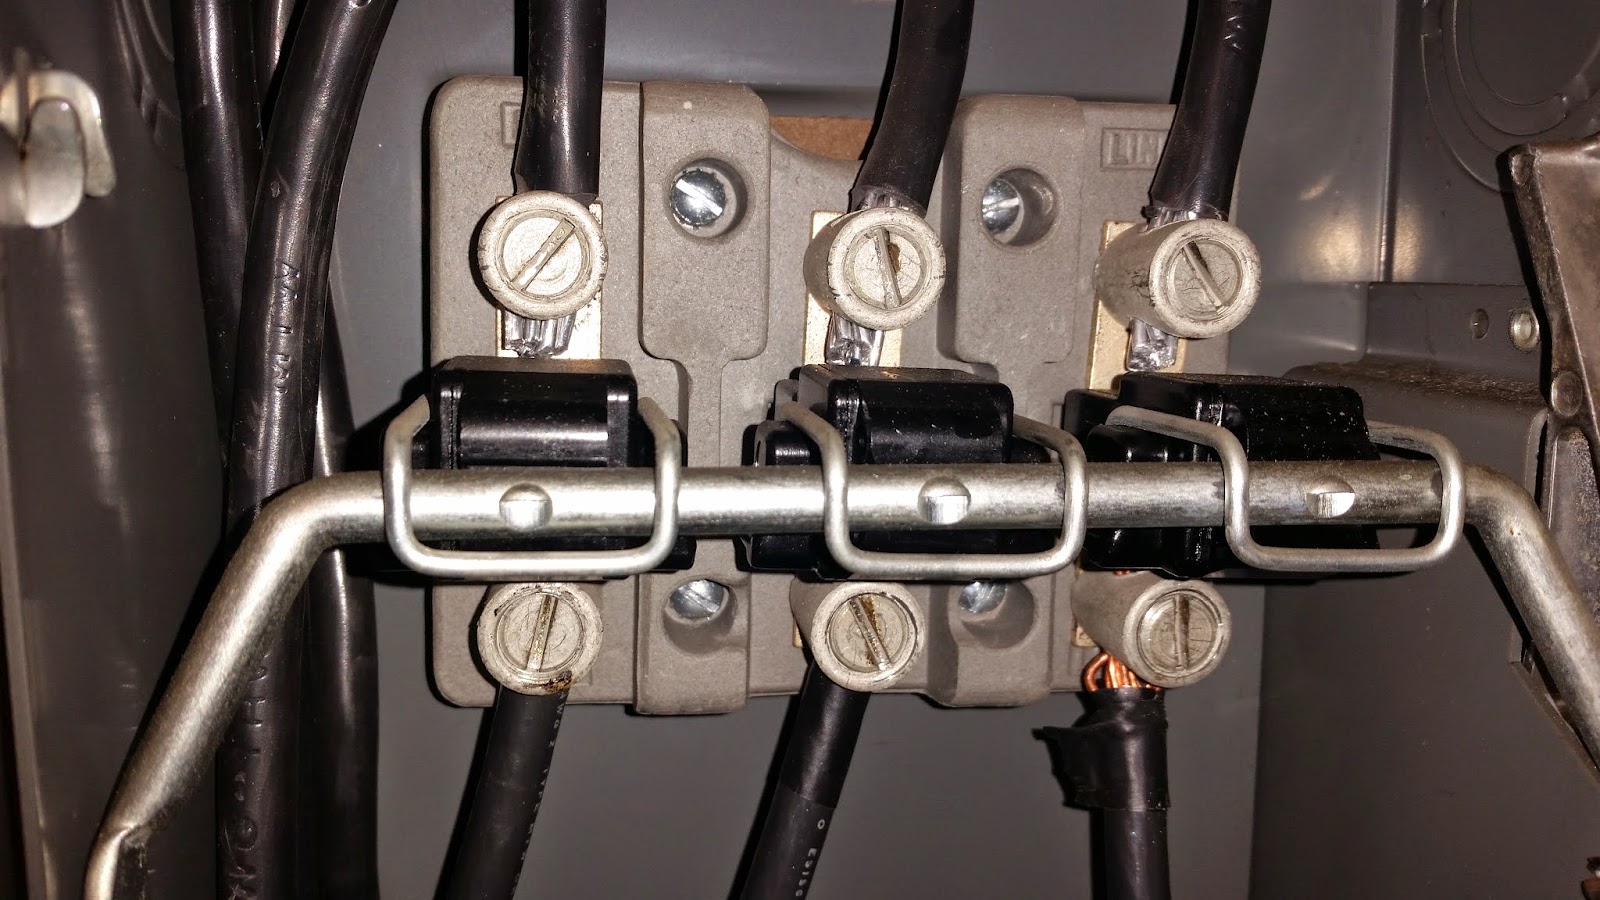 Copper vs. Aluminum Wiring: Which Is Better?